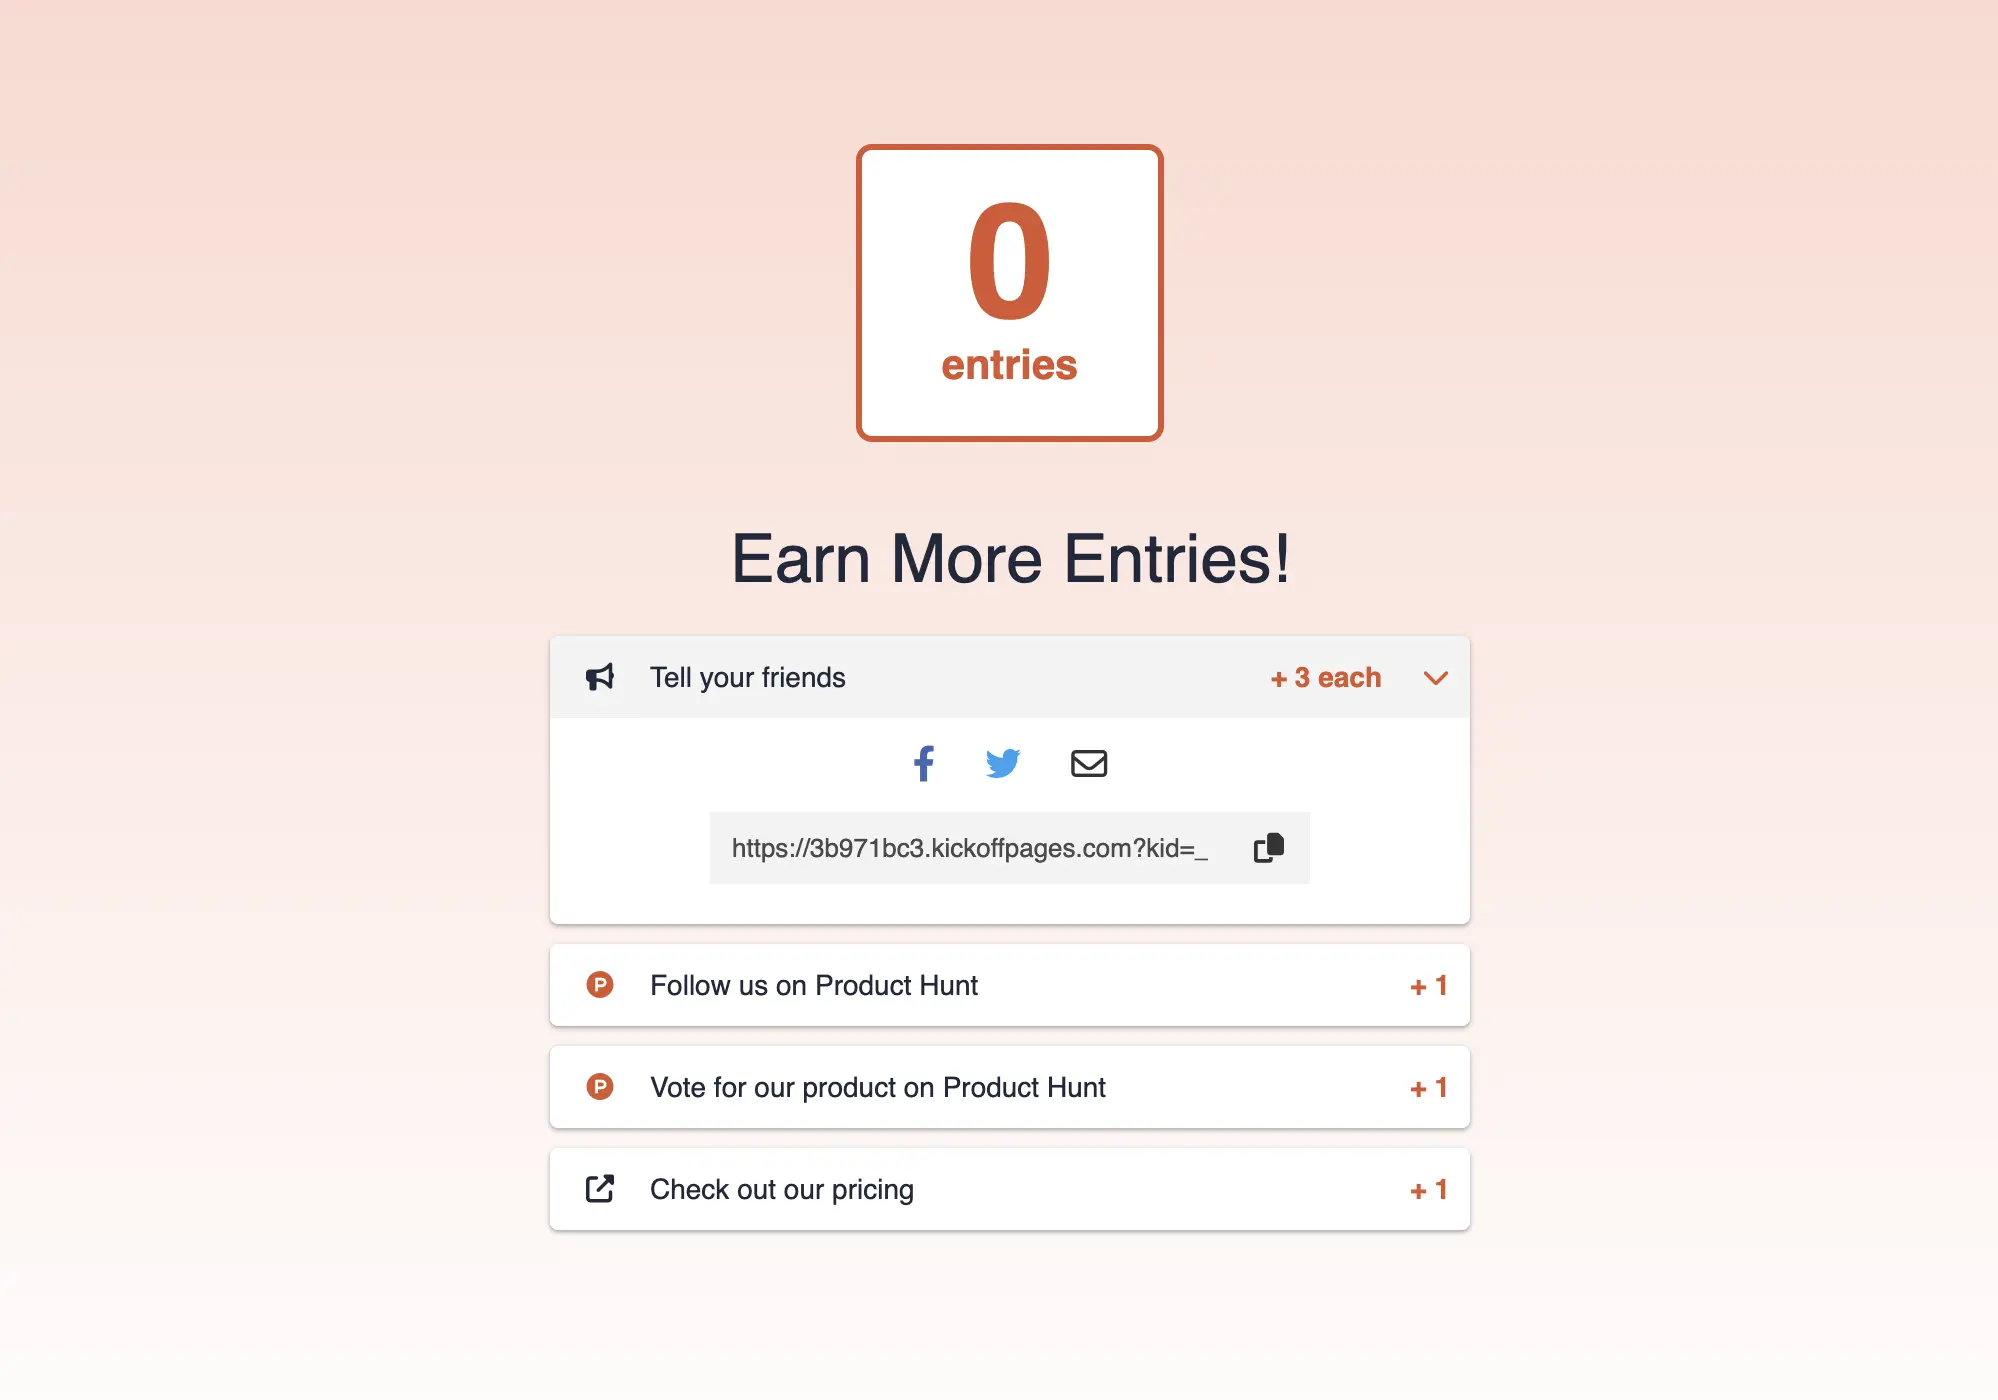 Product Hunt actions